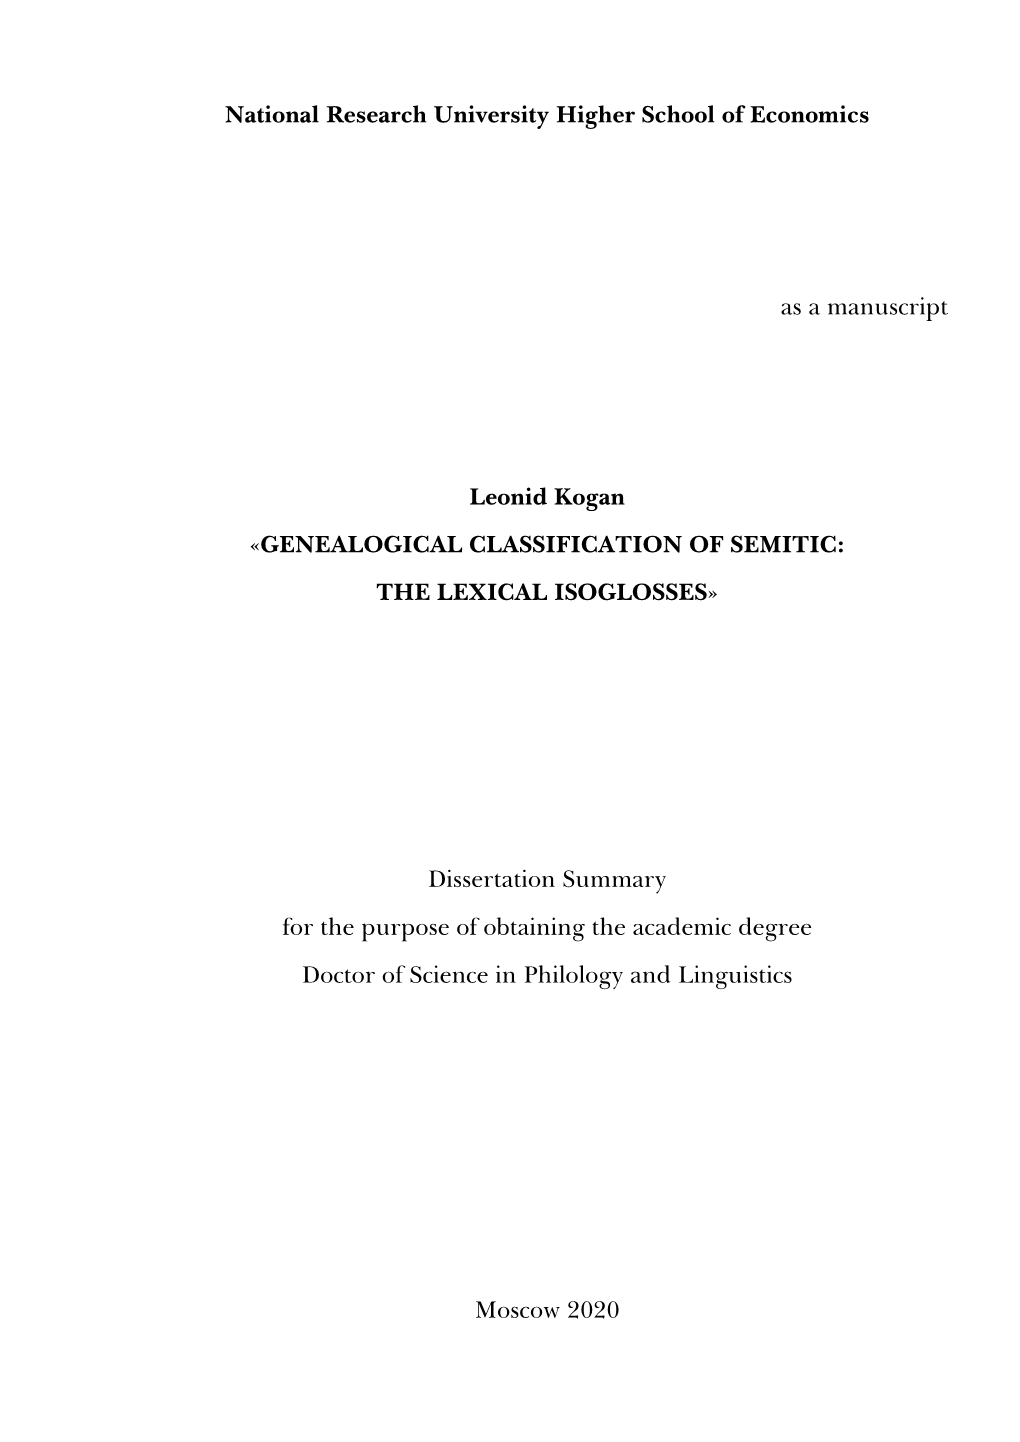 Genealogical Classification of Semitic: the Lexical Isoglosses»